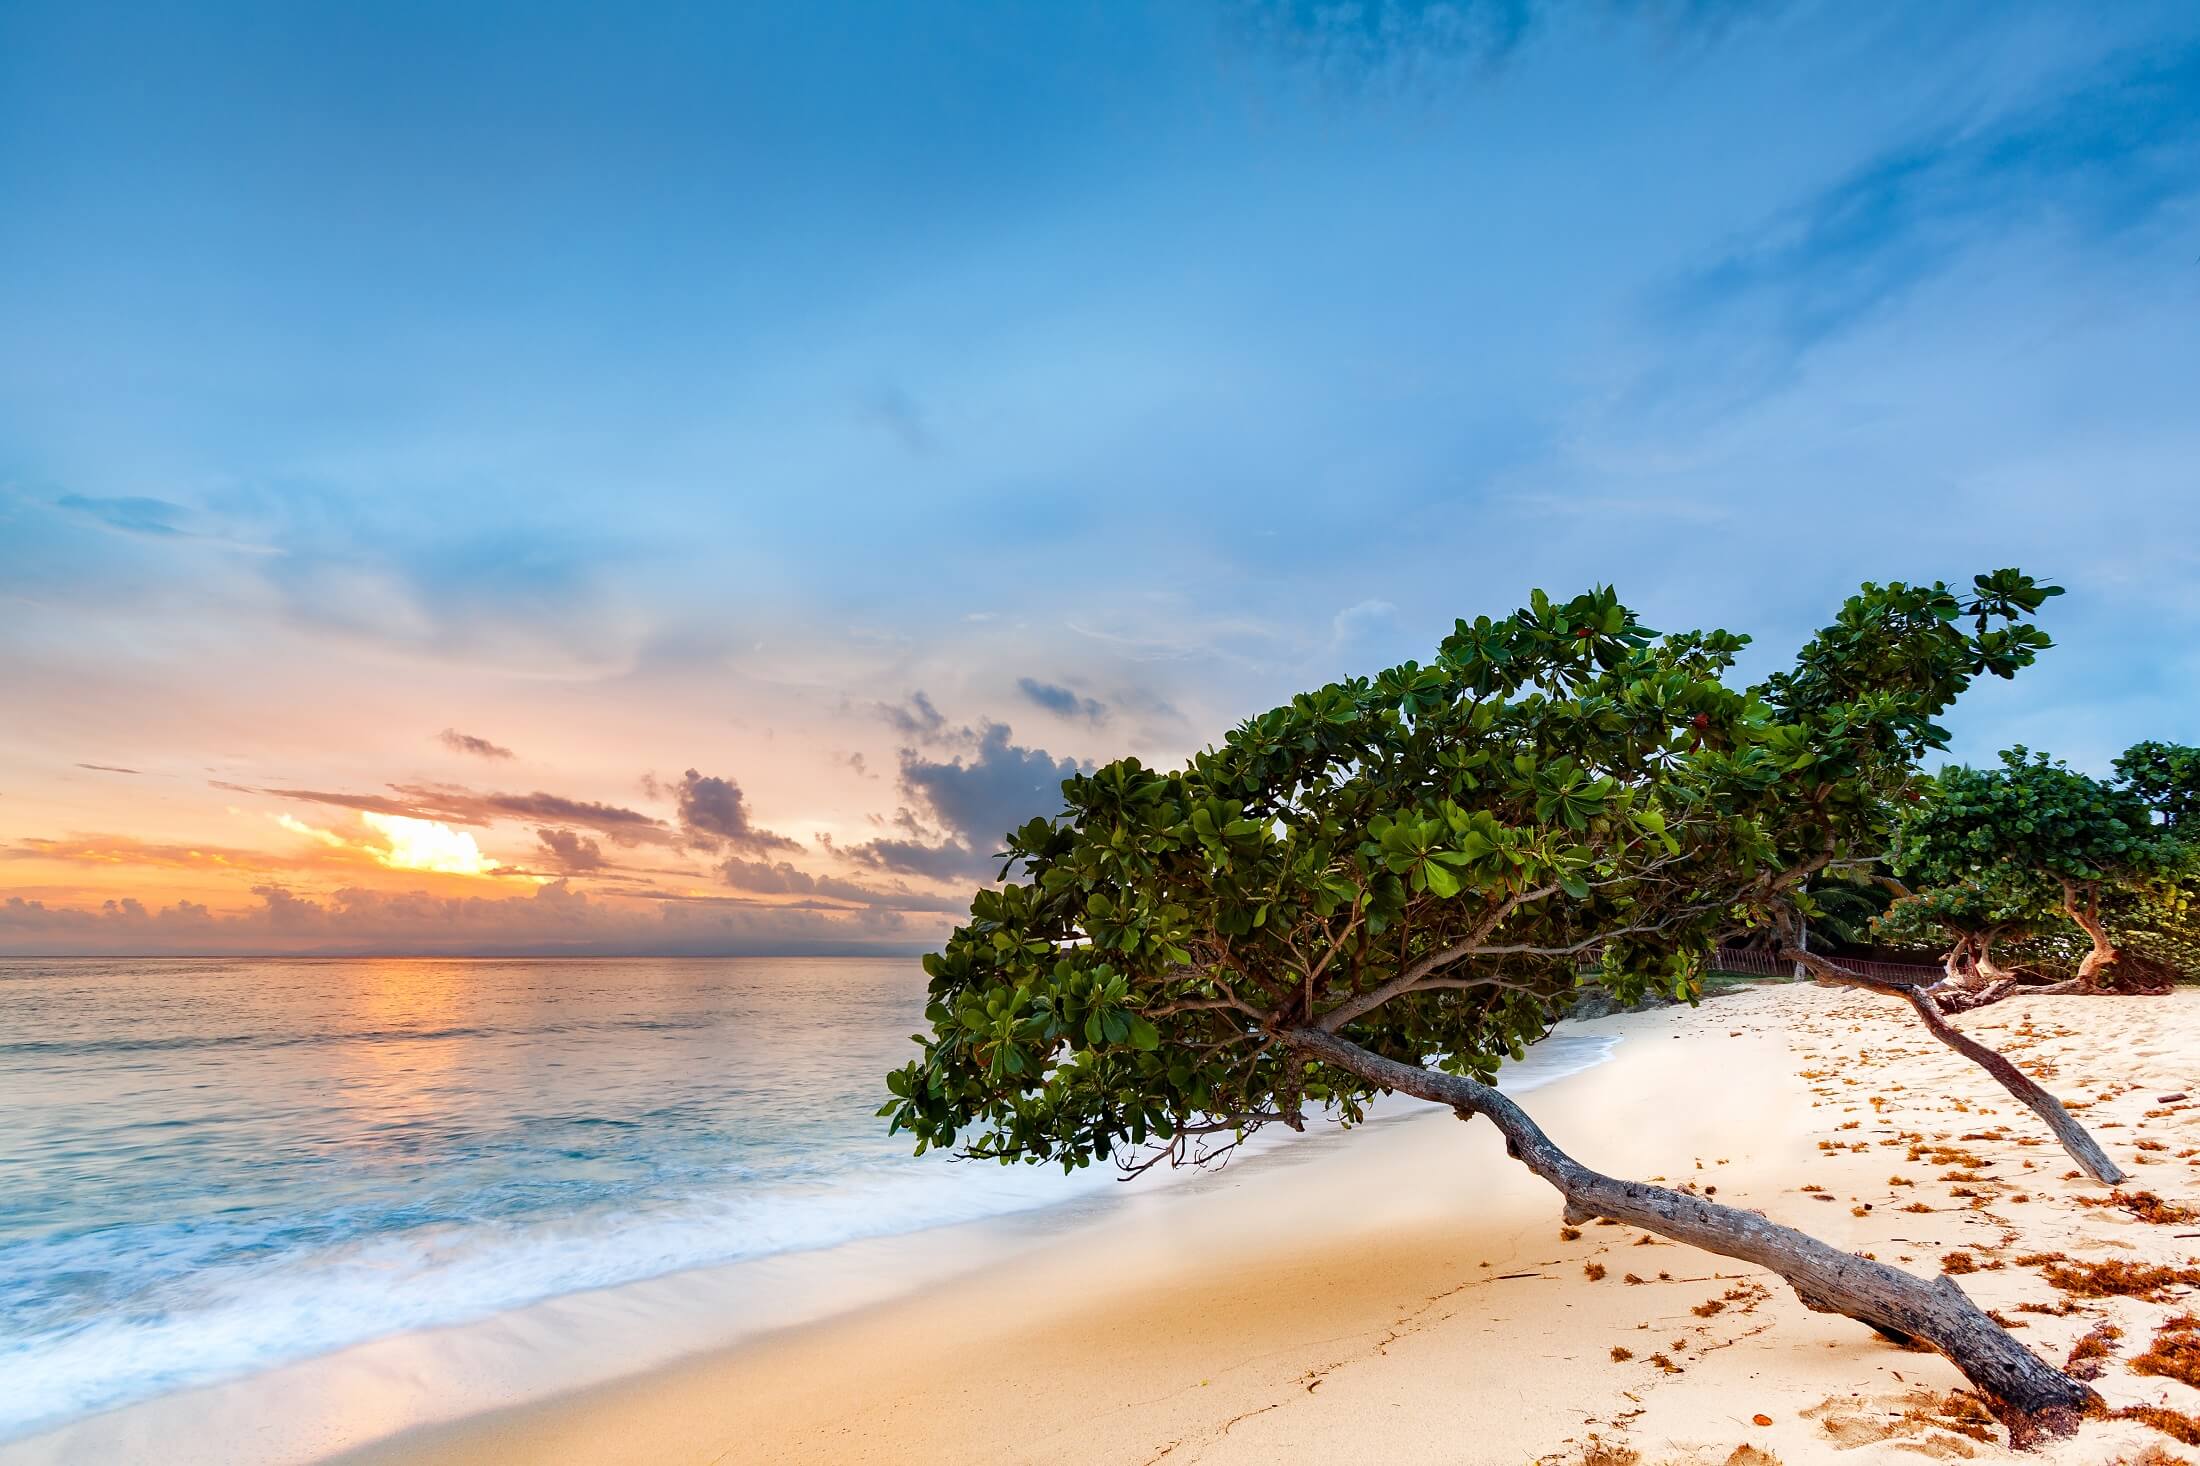 Exotic seascape with sea grape trees leaning above a sandy Caribbean beach at sunset, in Cayo Levantado, Dominican Republic